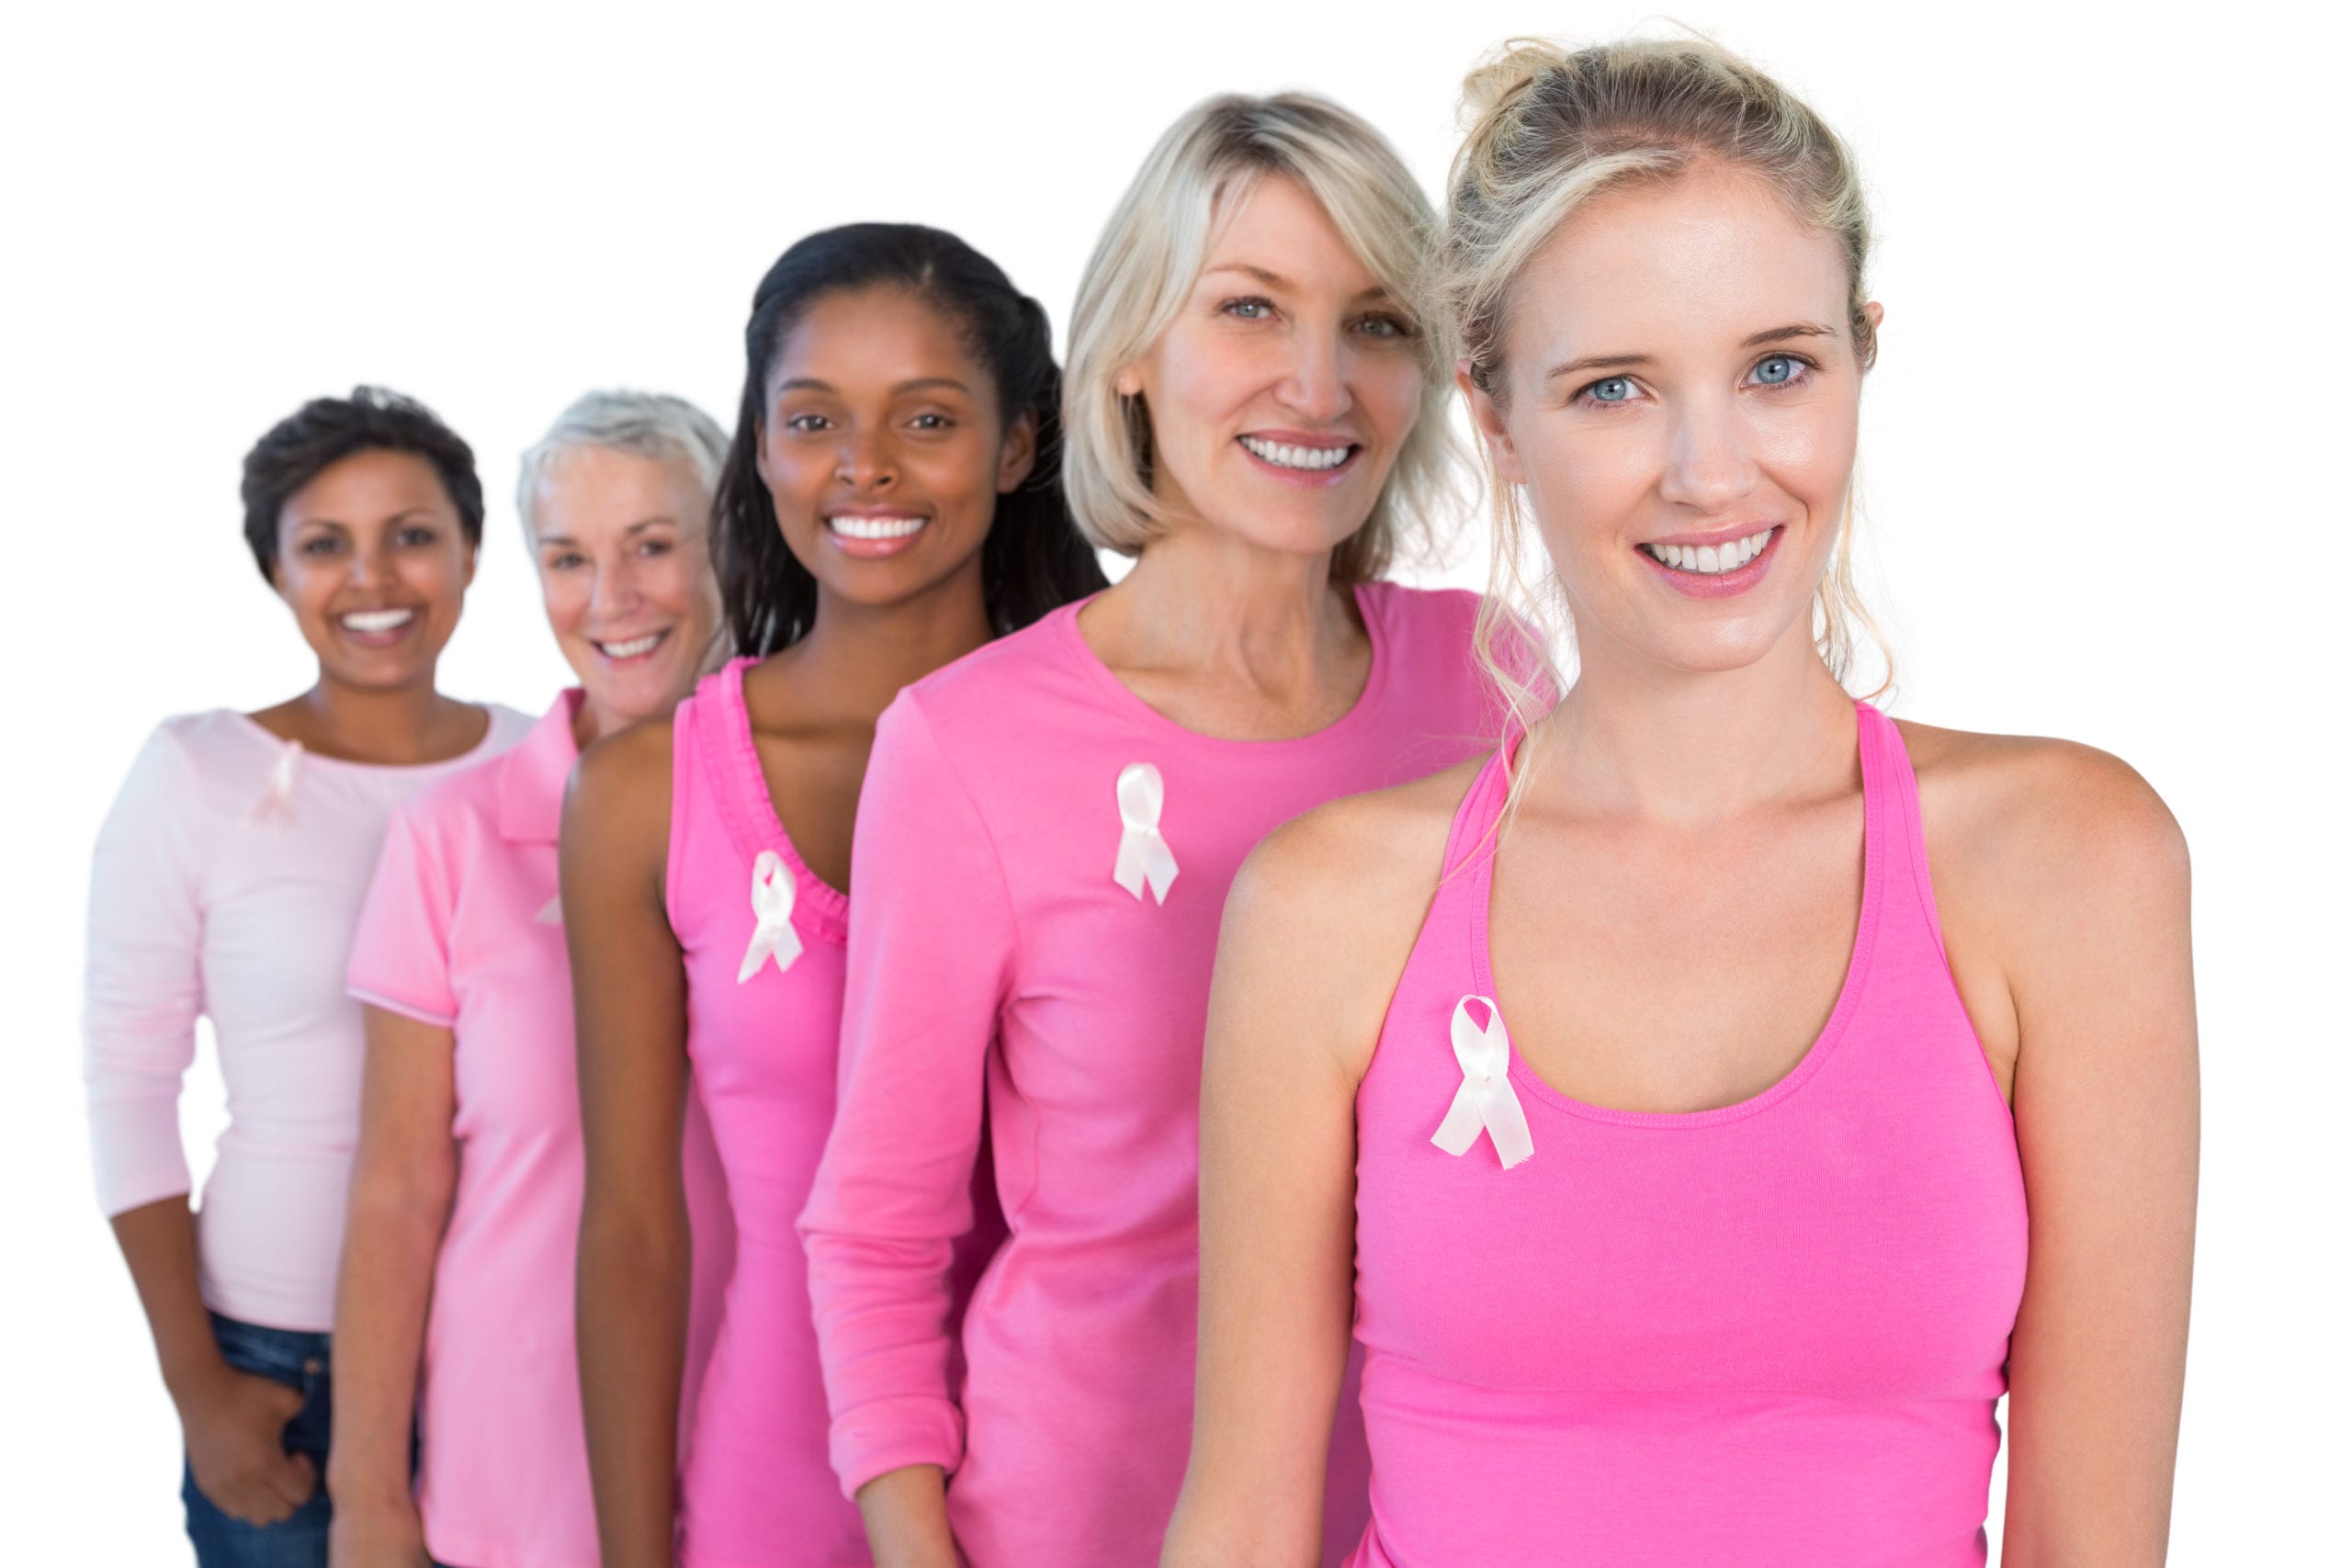 Five women wearing pink tops and white breast cancer ribbons